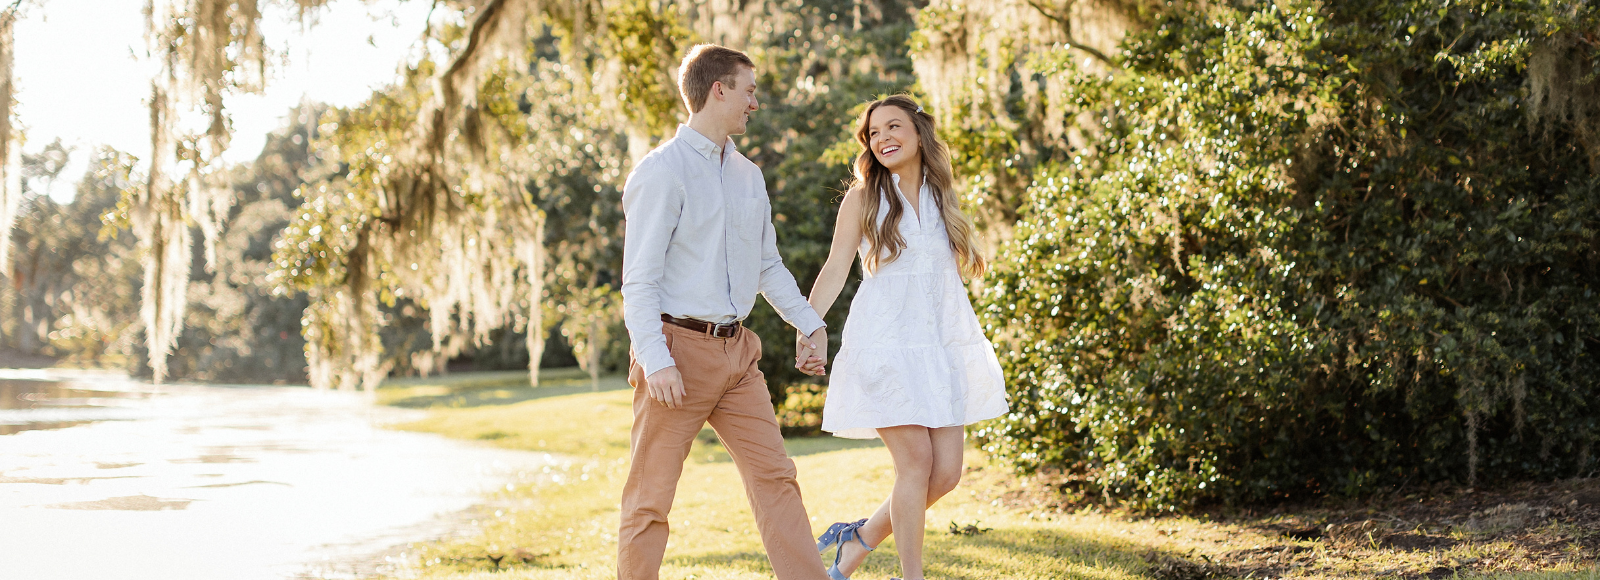 The Wedding Website of Victoria Stinson and Tanner Shaddox